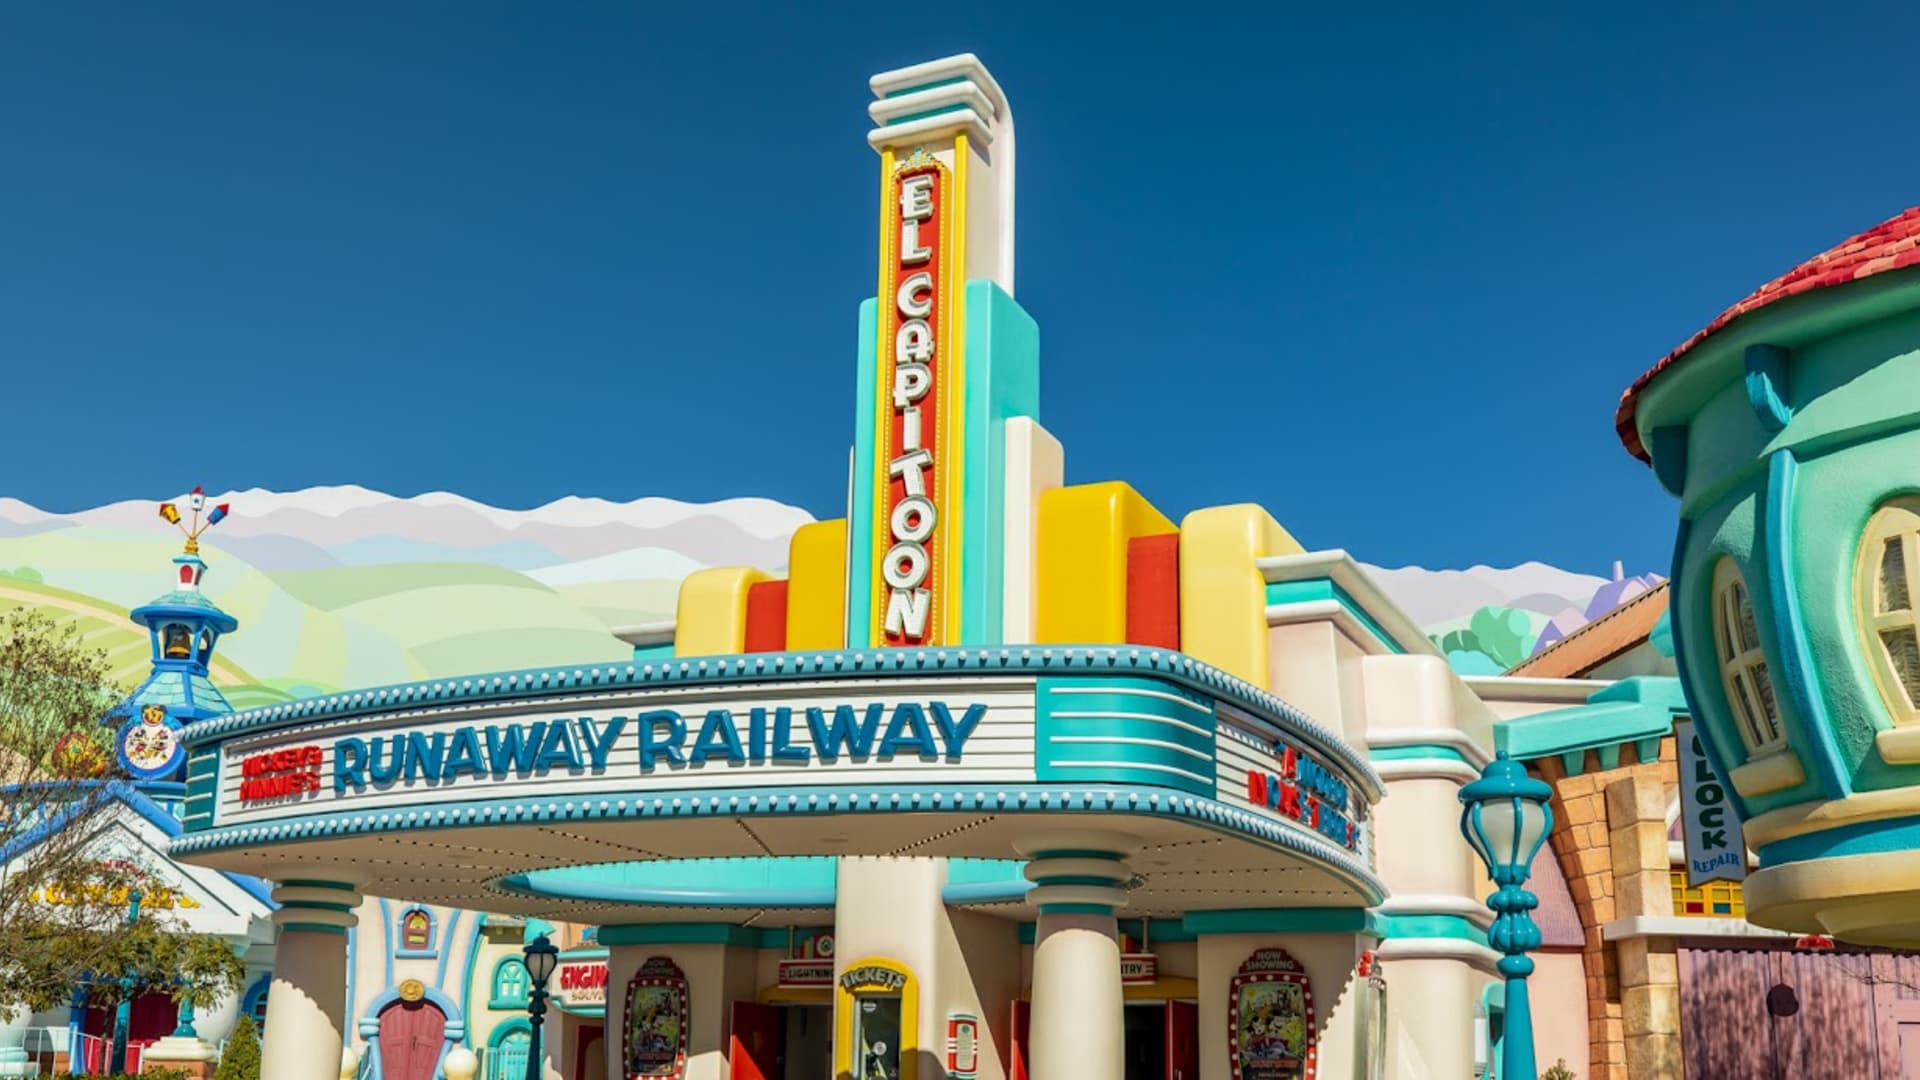 The El Capitoon Theatre exterior of Mickey and Minnie's Runaway Railway ride at Disneyland in Anaheim, California.